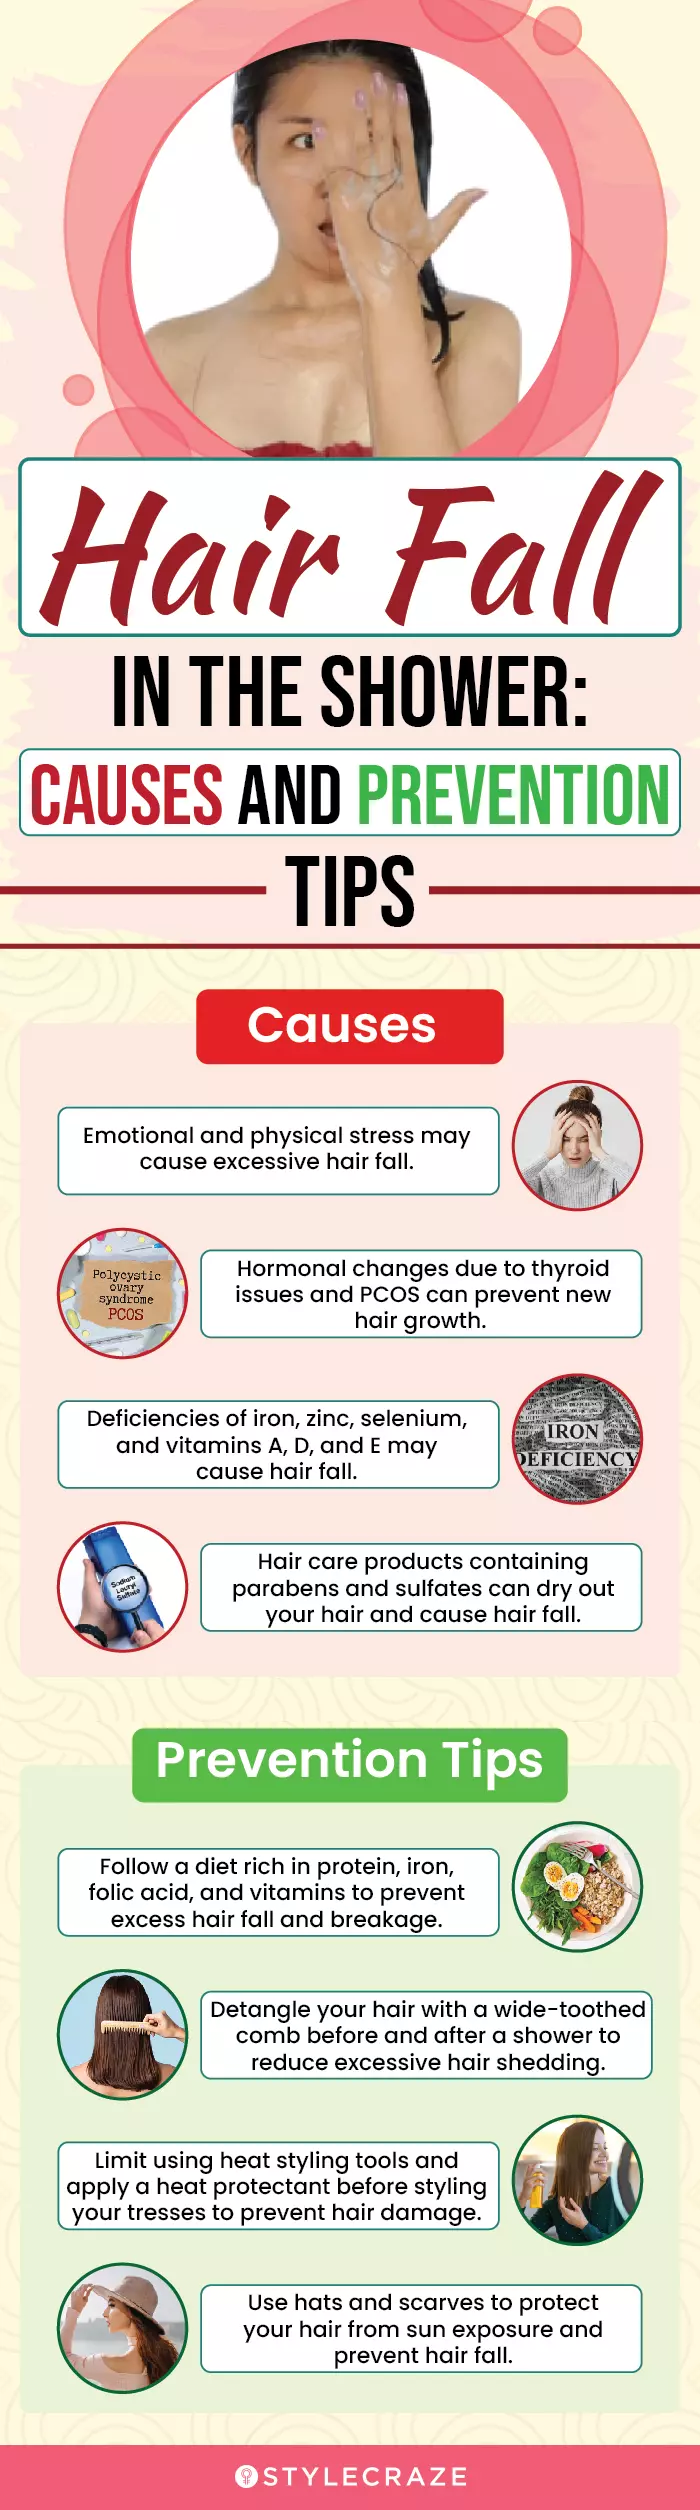 hair fall in the shower causes and prevention tips (infographic)